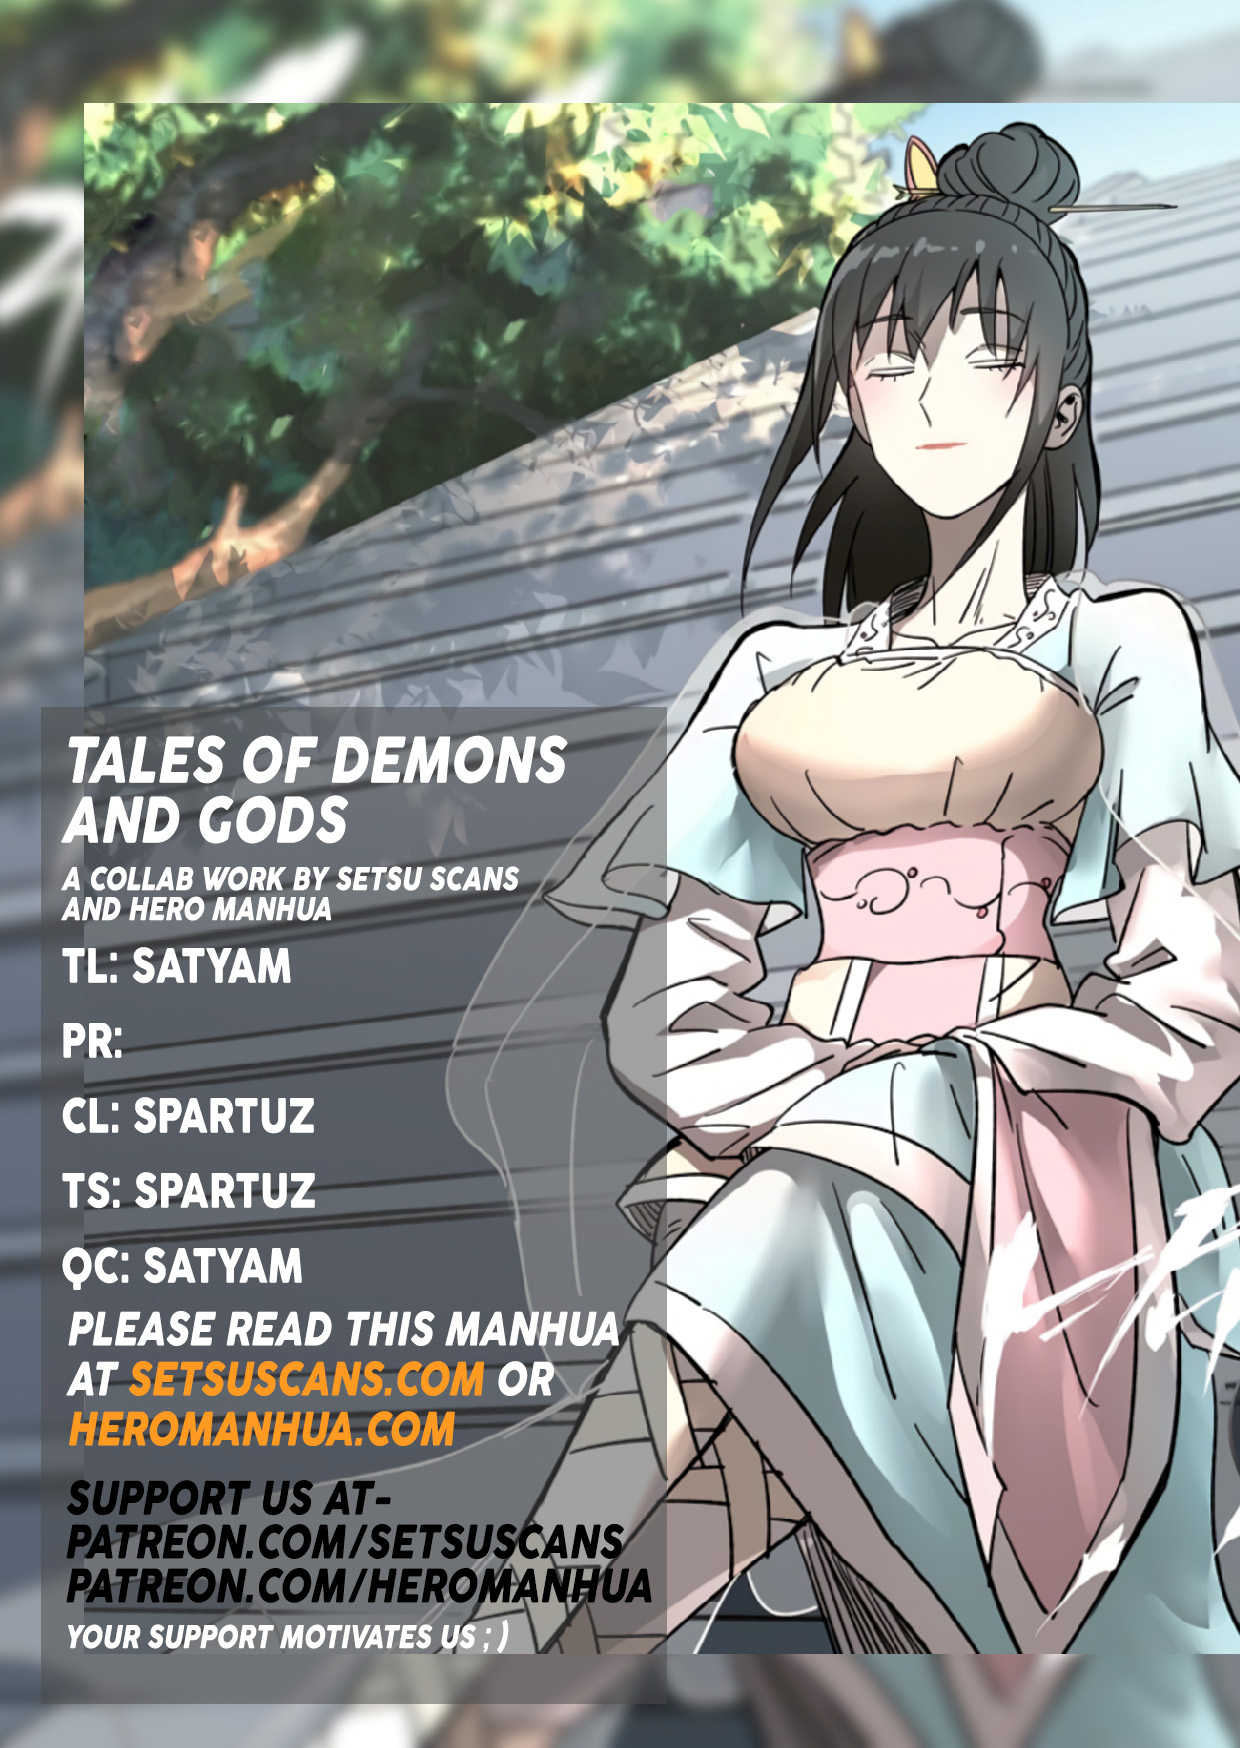 Tales of Demons and Gods - Chapter 10735 - The exchange meeting is not over yet (2) - Image 1